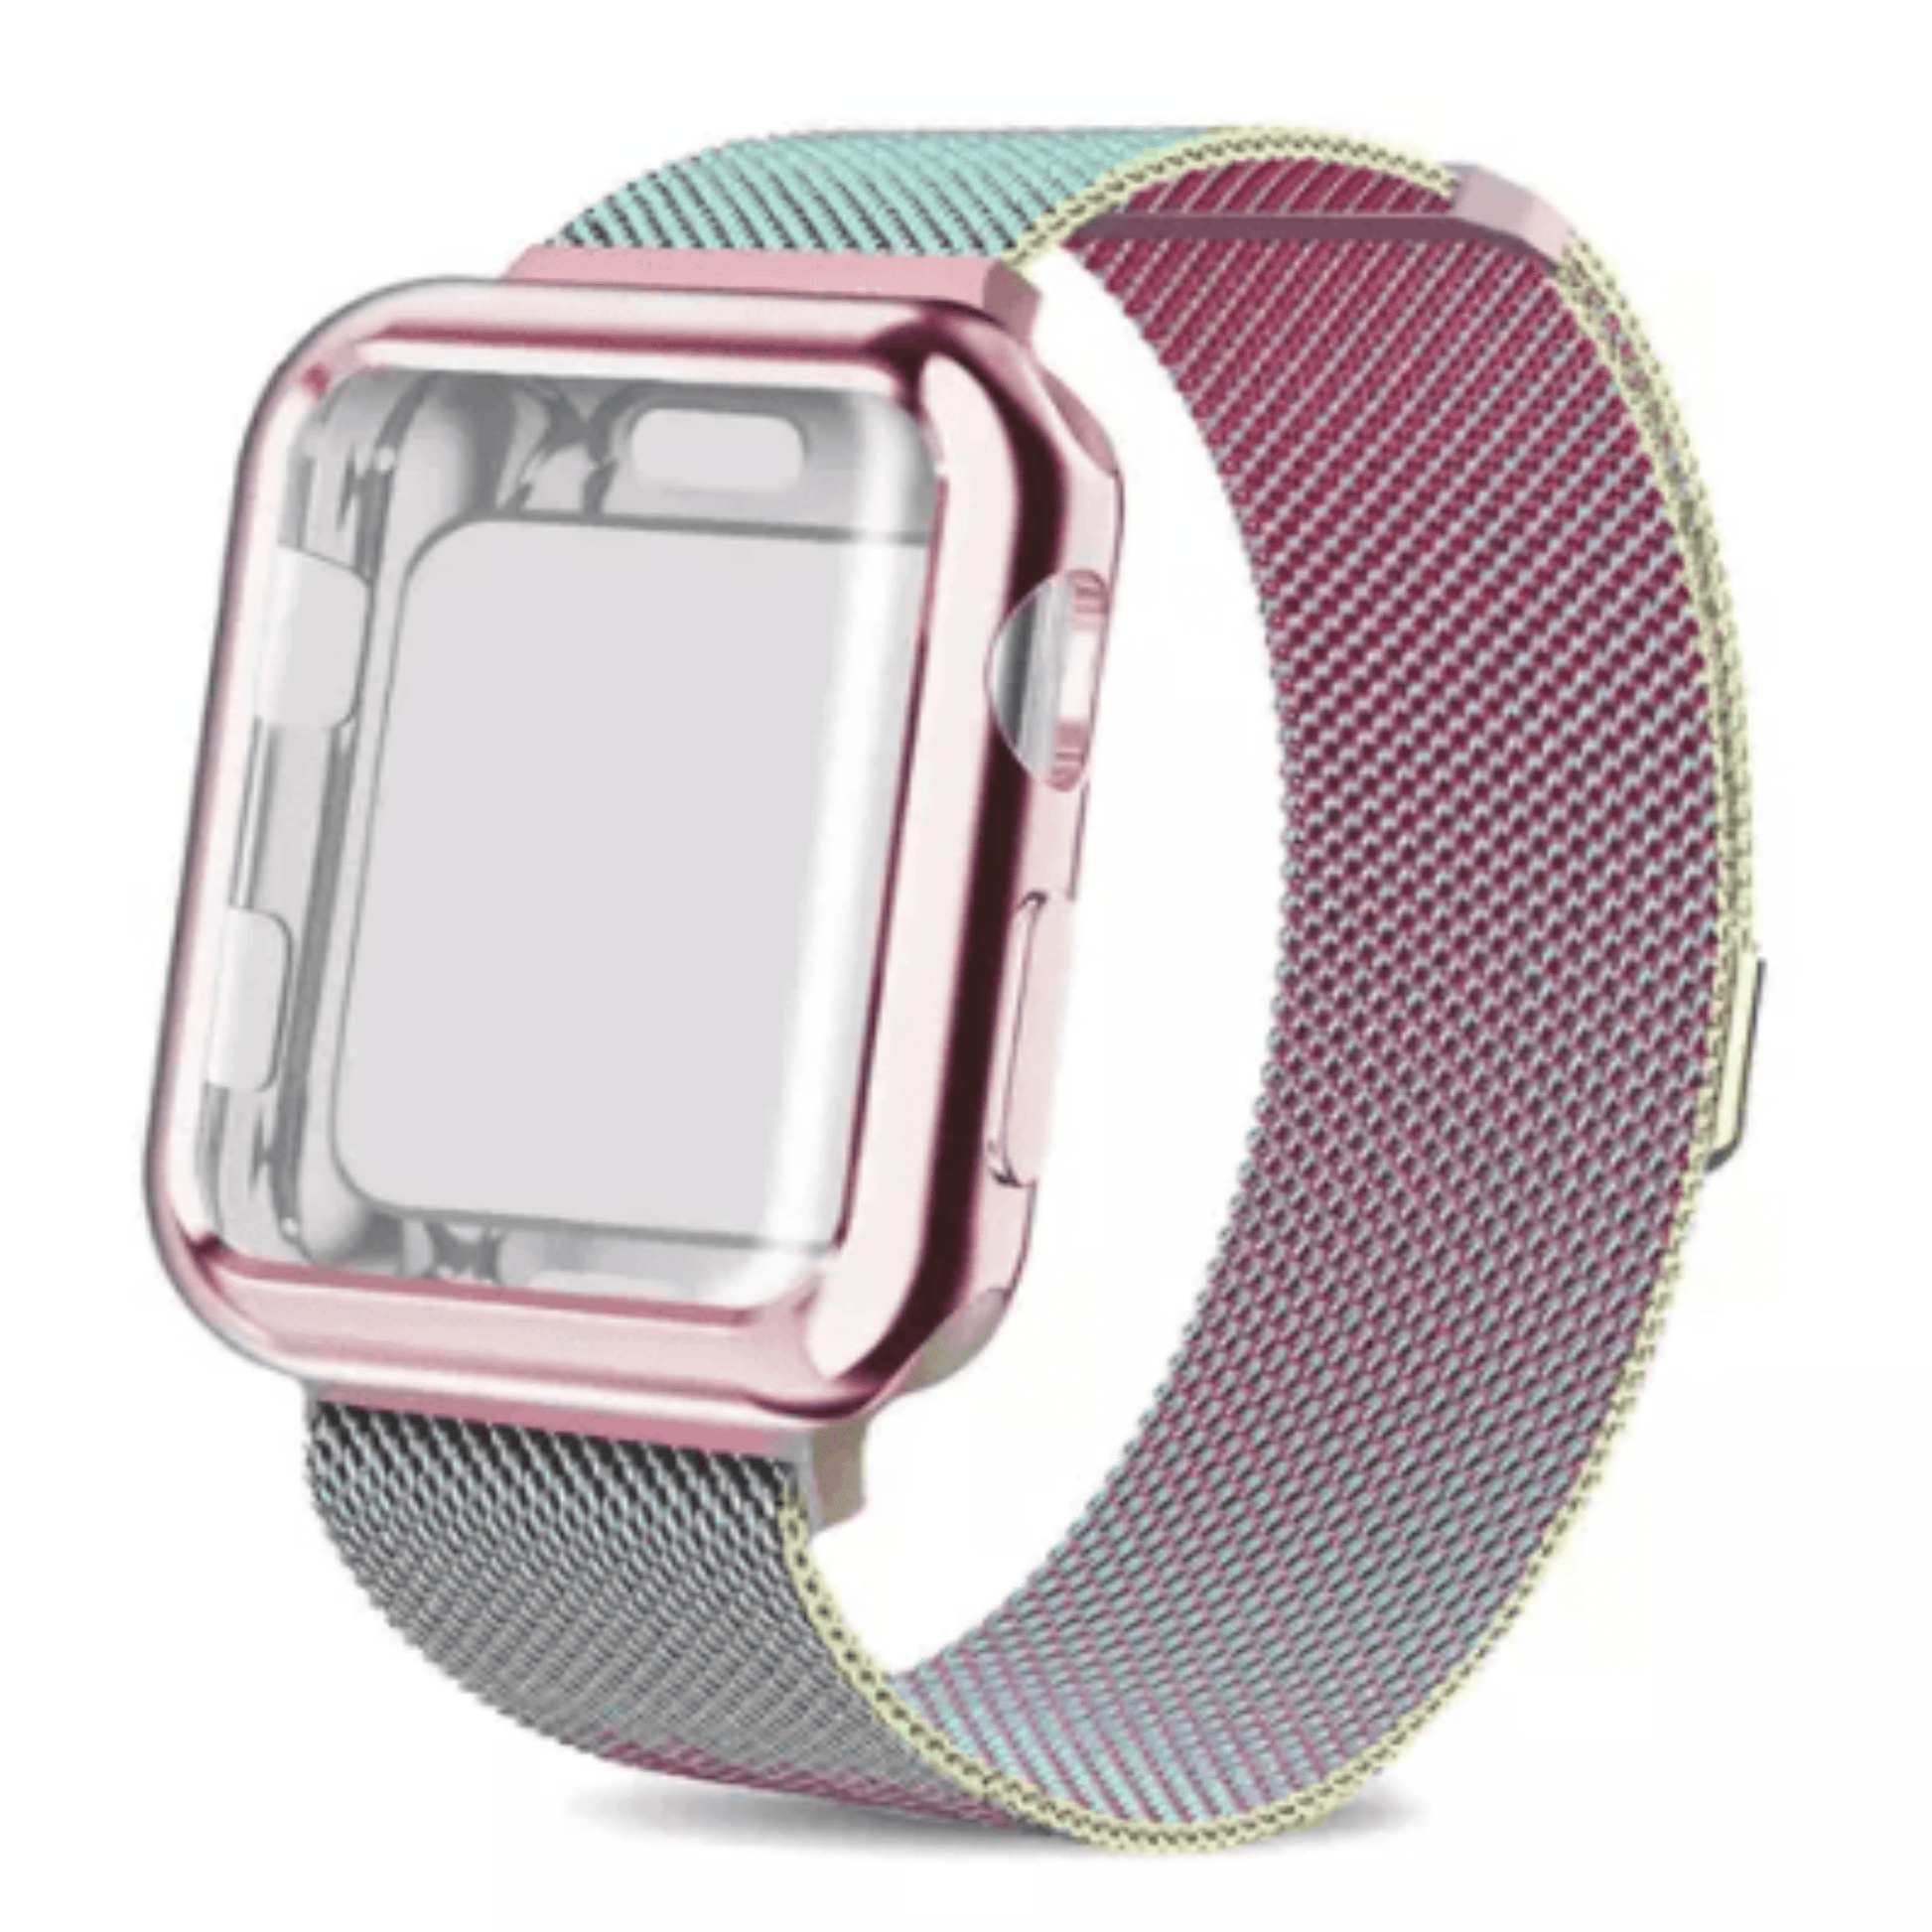 Mesh Milanese Wrist Band Loop W/ Screen Protector Bumper Case For Apple Watch Rainbow Band & Rainbow Case Watch Band and Cover Combo Watch Bands Elements Watches